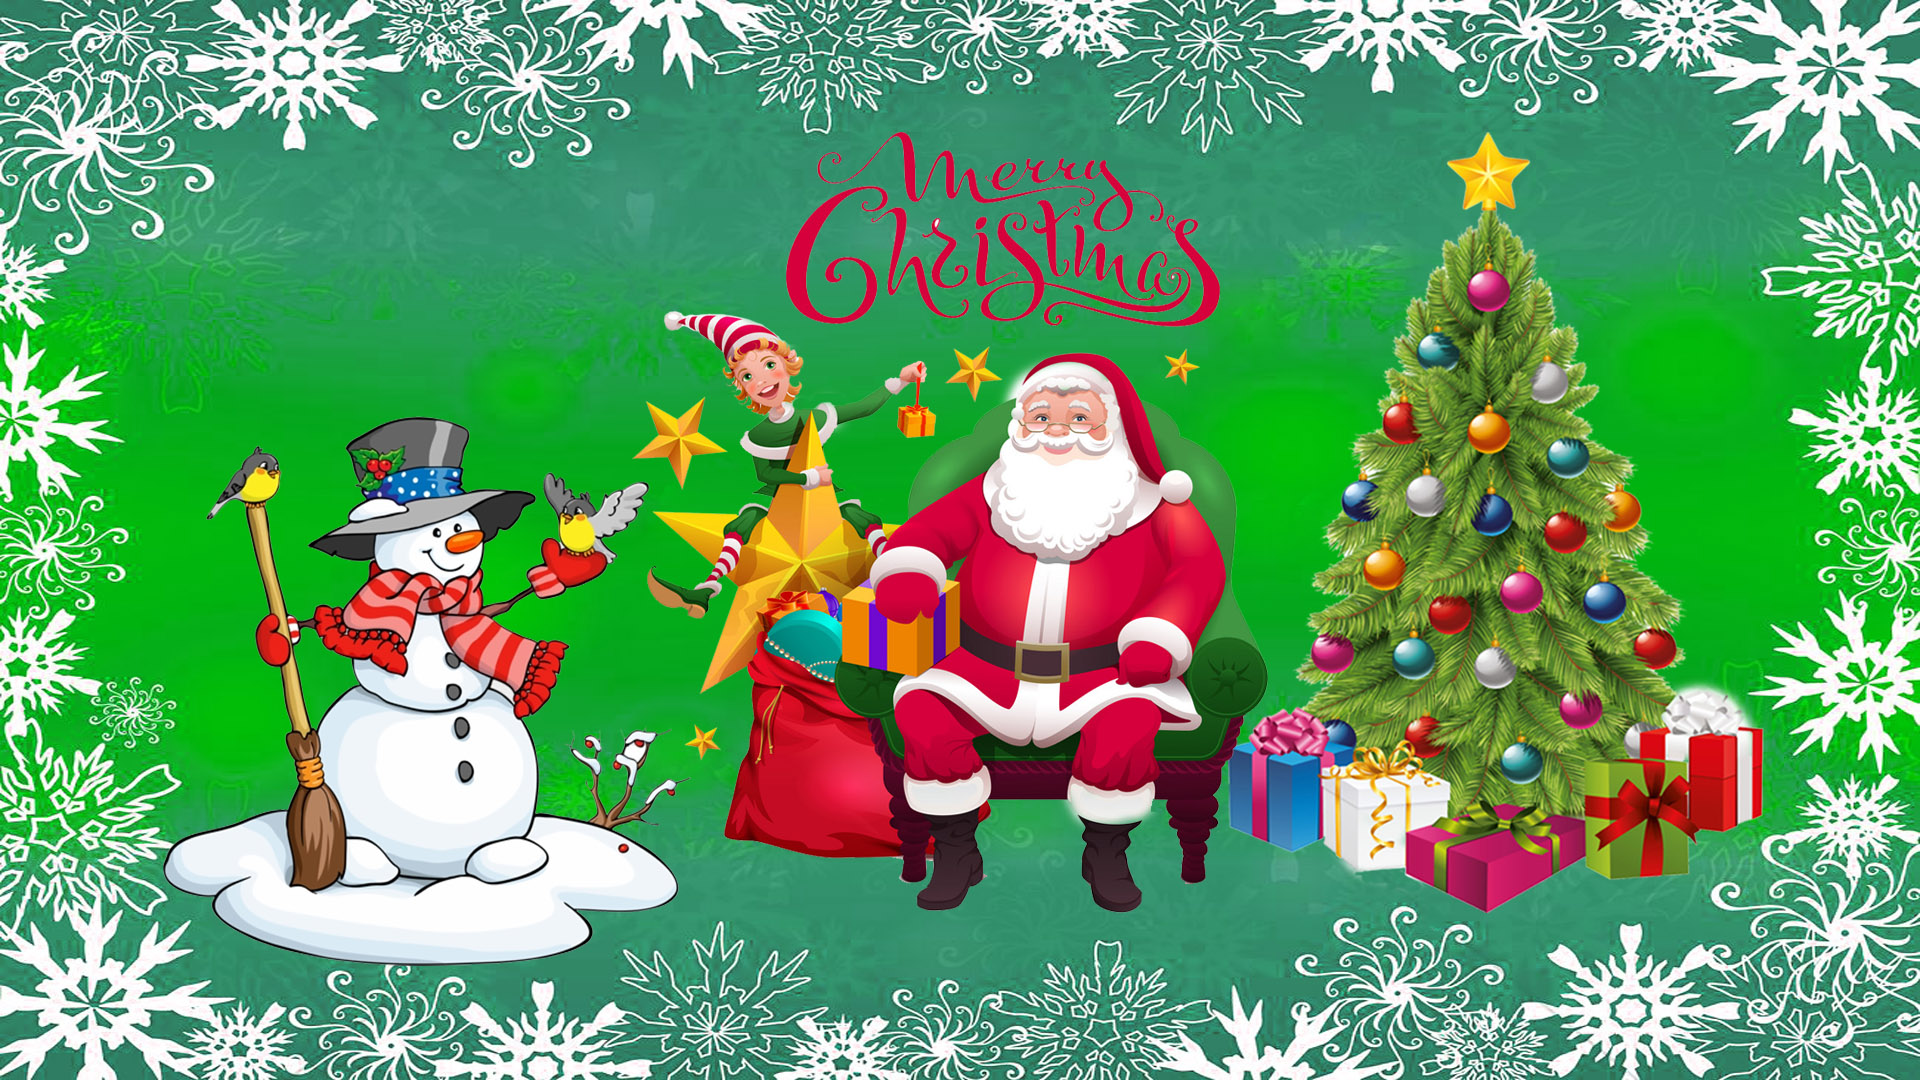 Merry Christmas Santa With Gift Christmas Tree With Decorations Snowman Wallpaper Hd